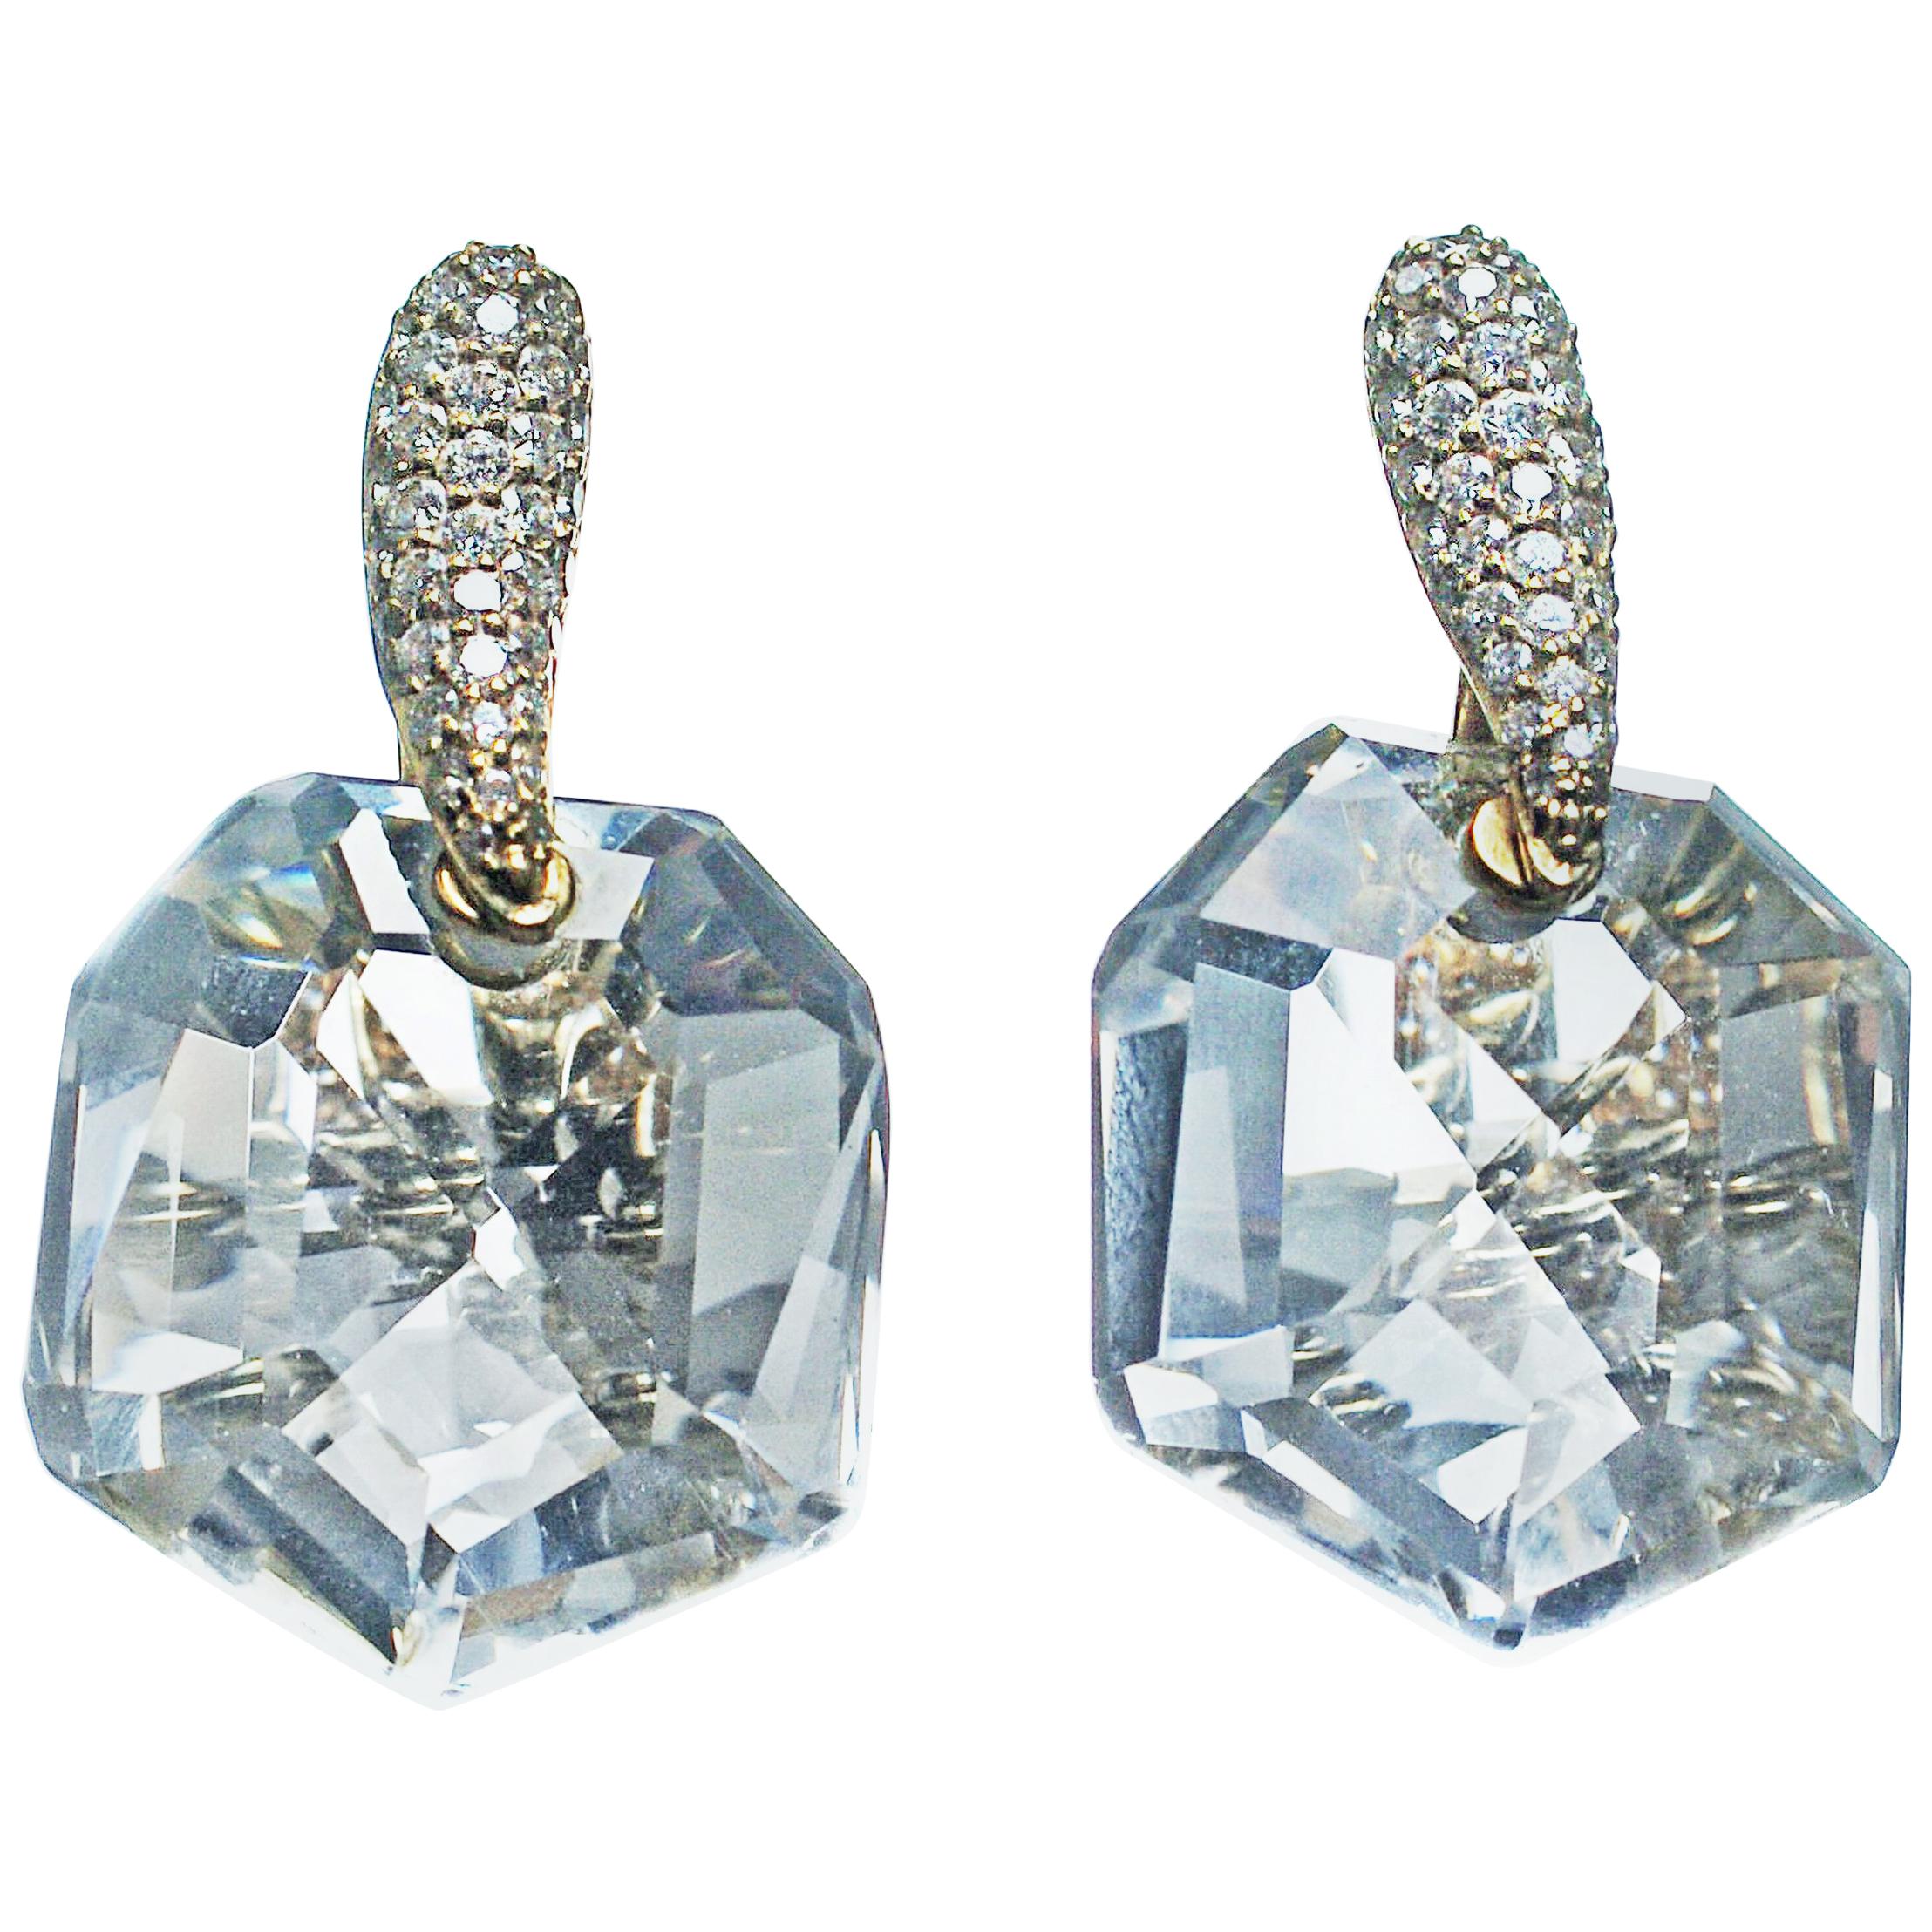 Chic Faceted Rock Crystal Diamond 18 Karat Yellow Gold Earrings